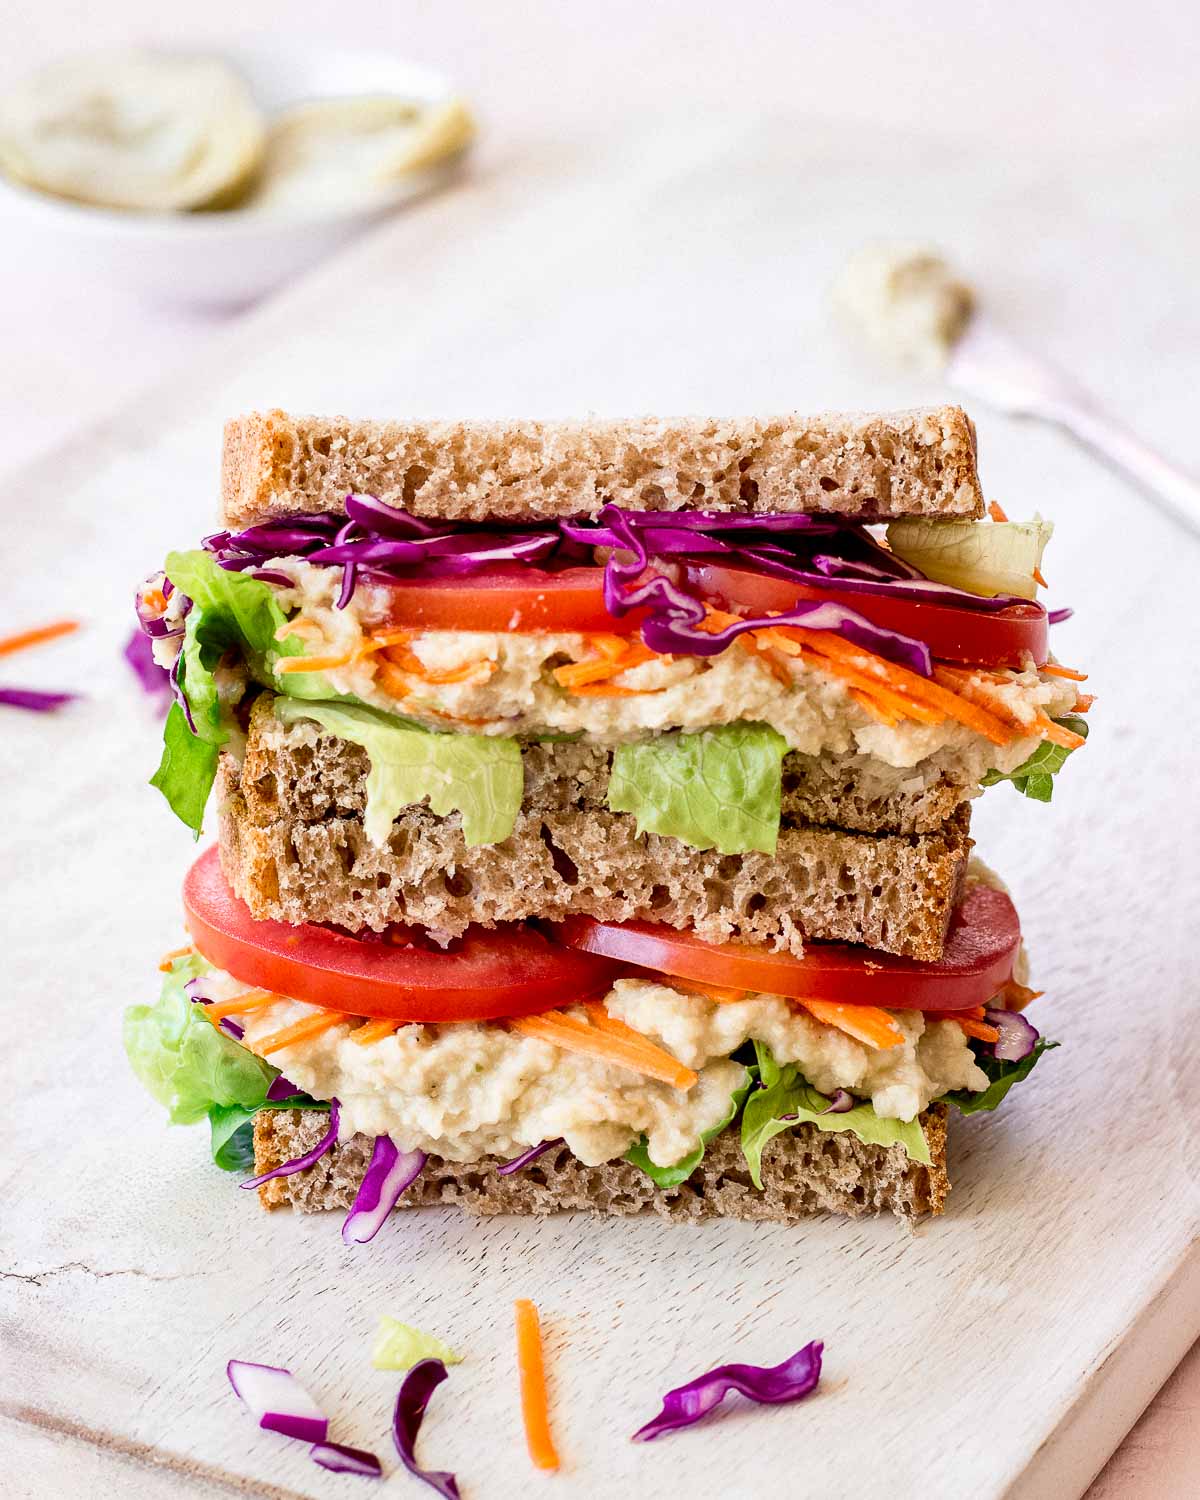 How to go vegan - artichoke and white bean sandwich with fresh vegetables.